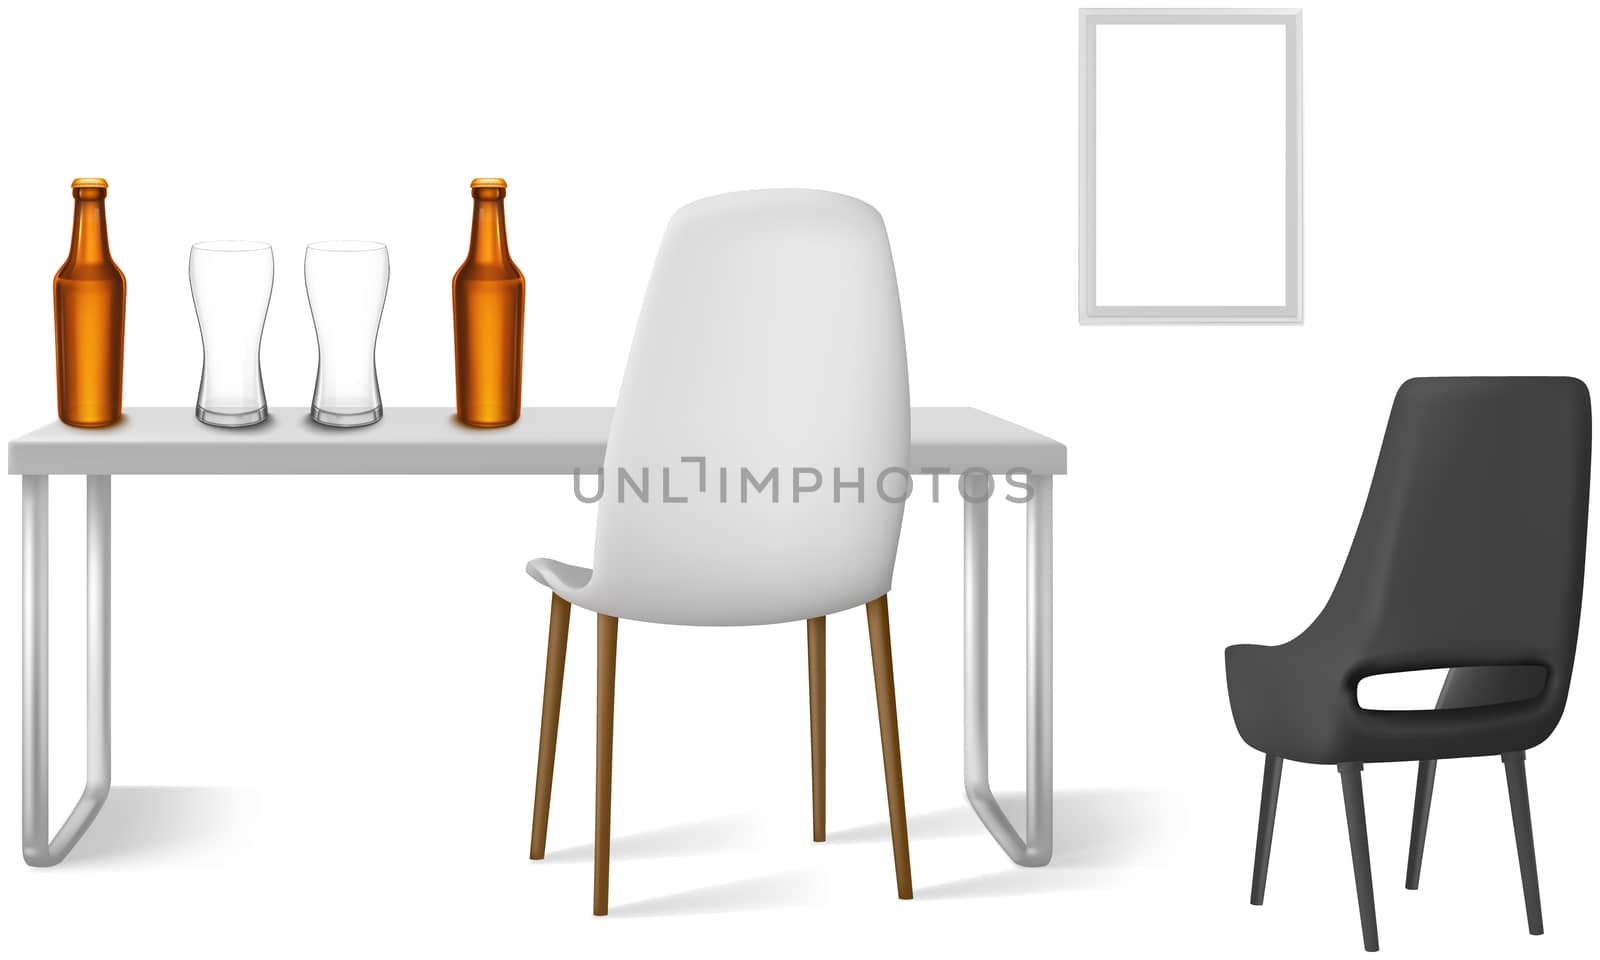 beer glass and bottle on a table with chair beside by aanavcreationsplus